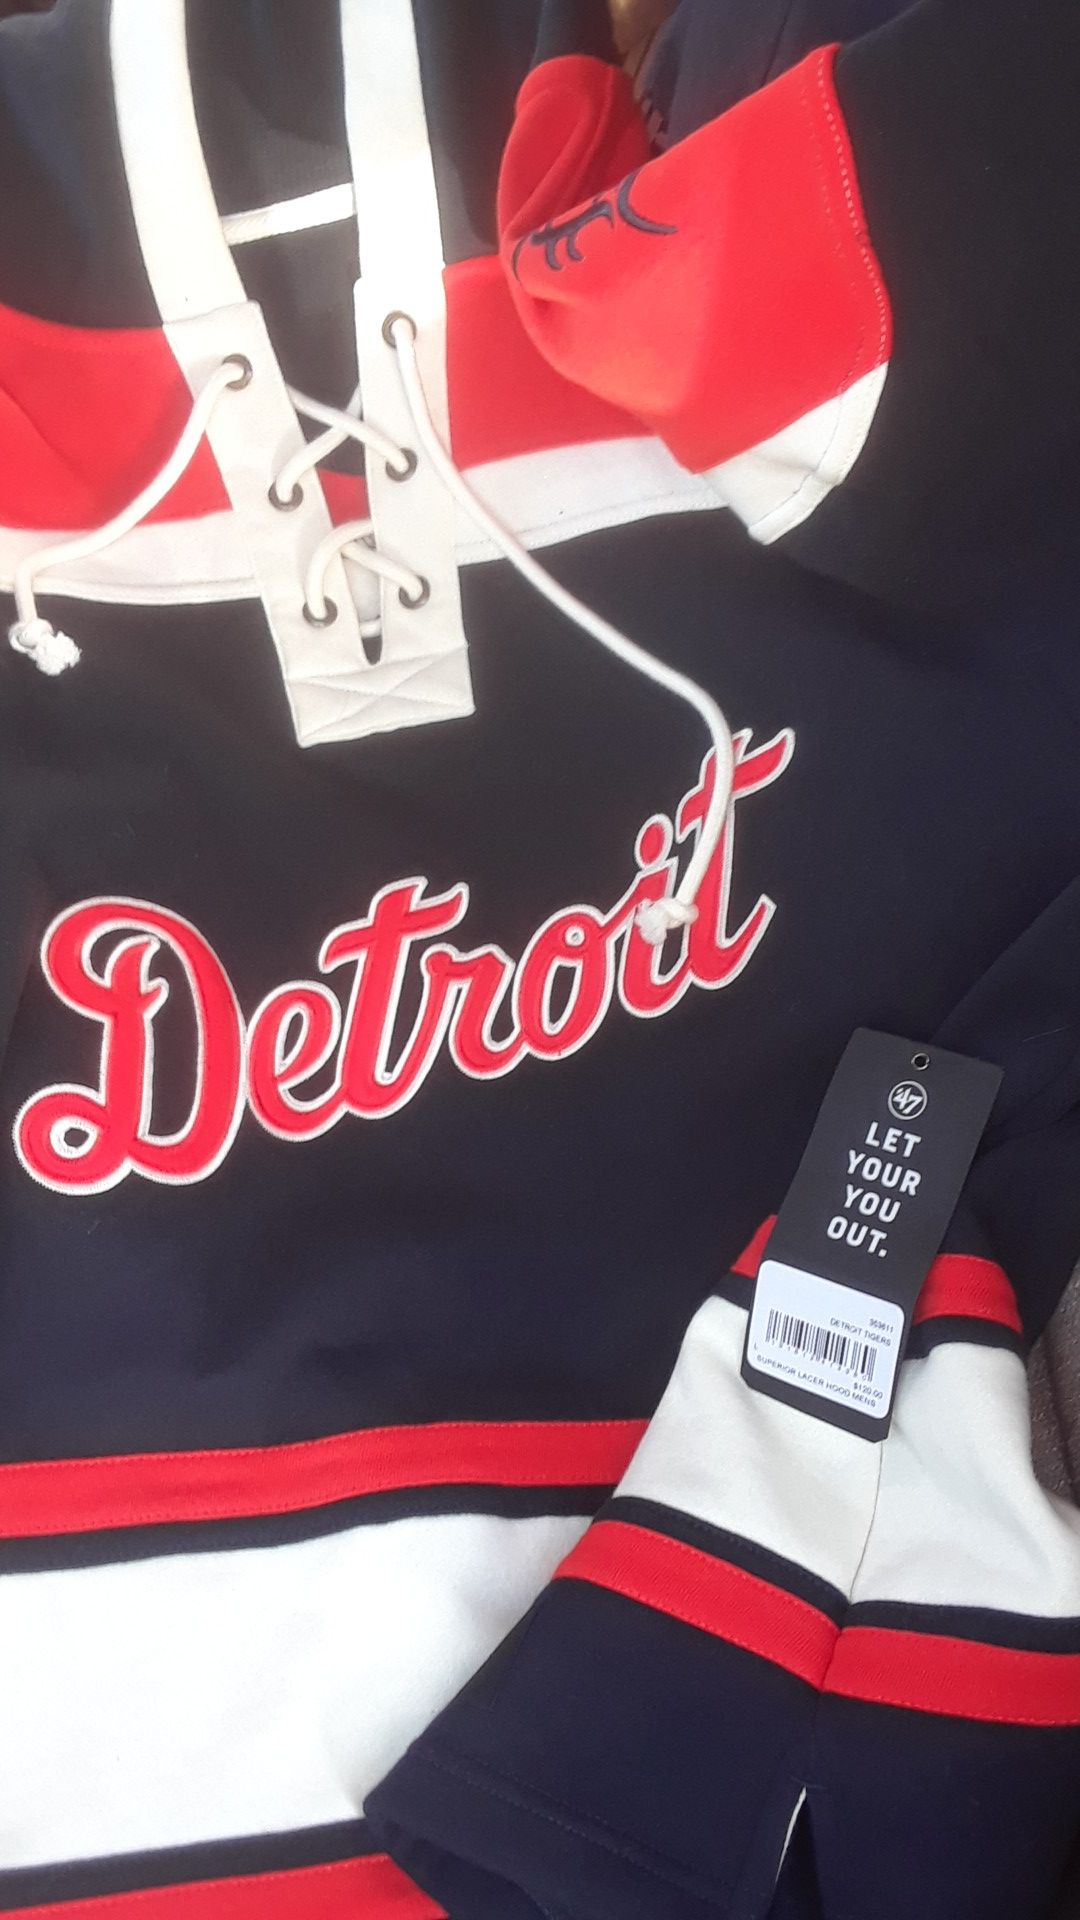 Detroit tigers jacket and hoody